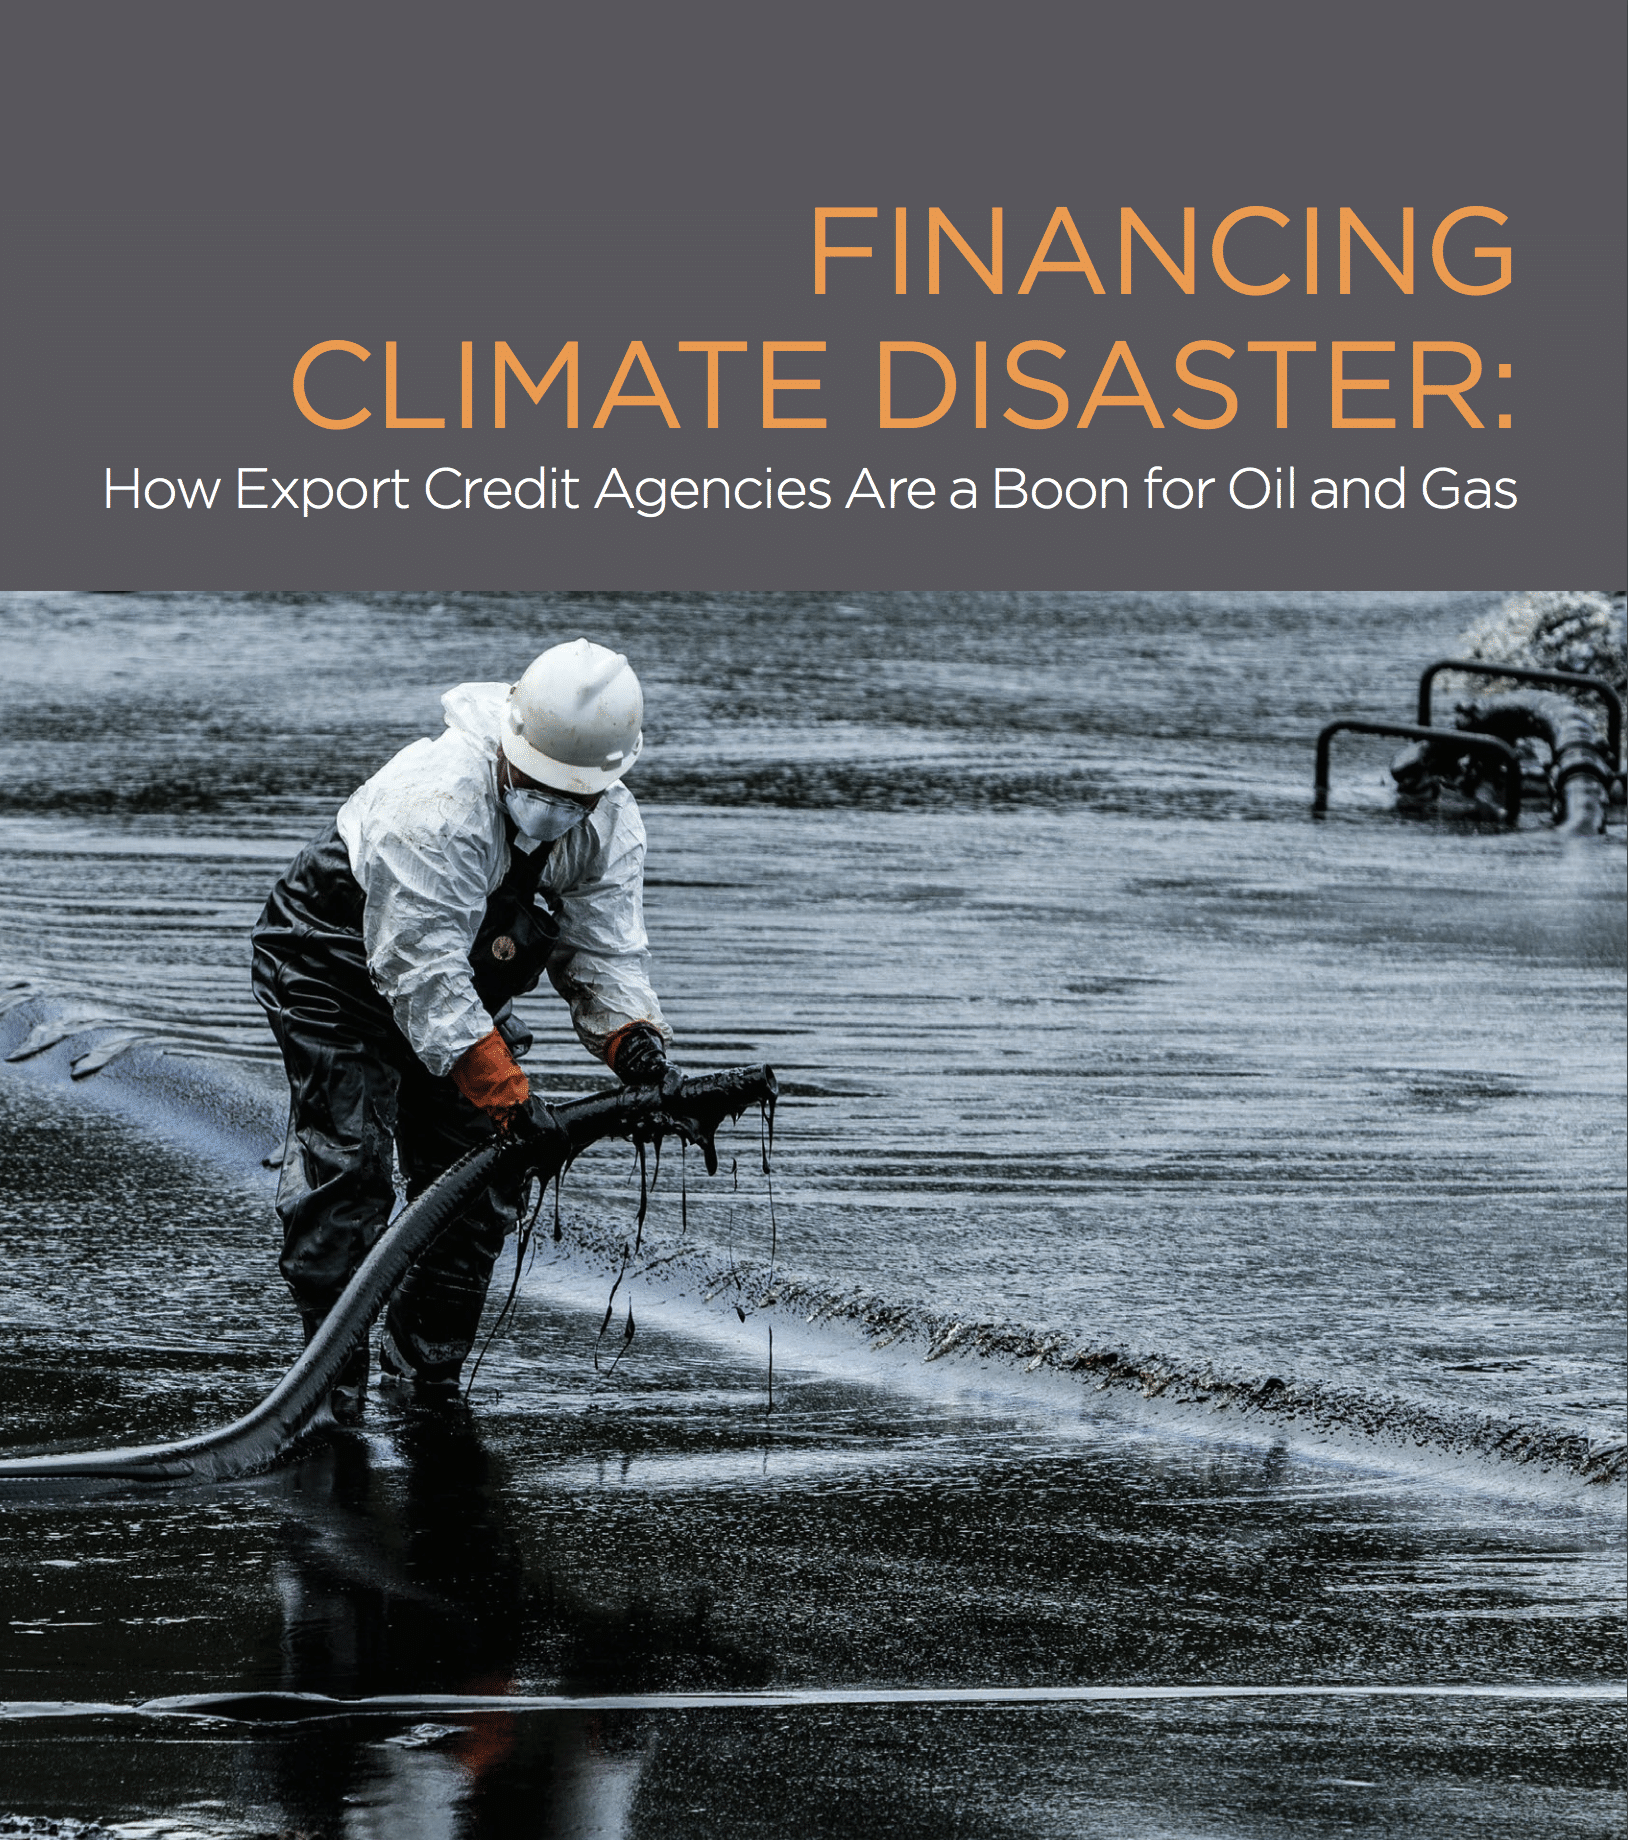 Financing Climate Disaster: How Export Credit Agencies Are a Boon for Oil and Gas